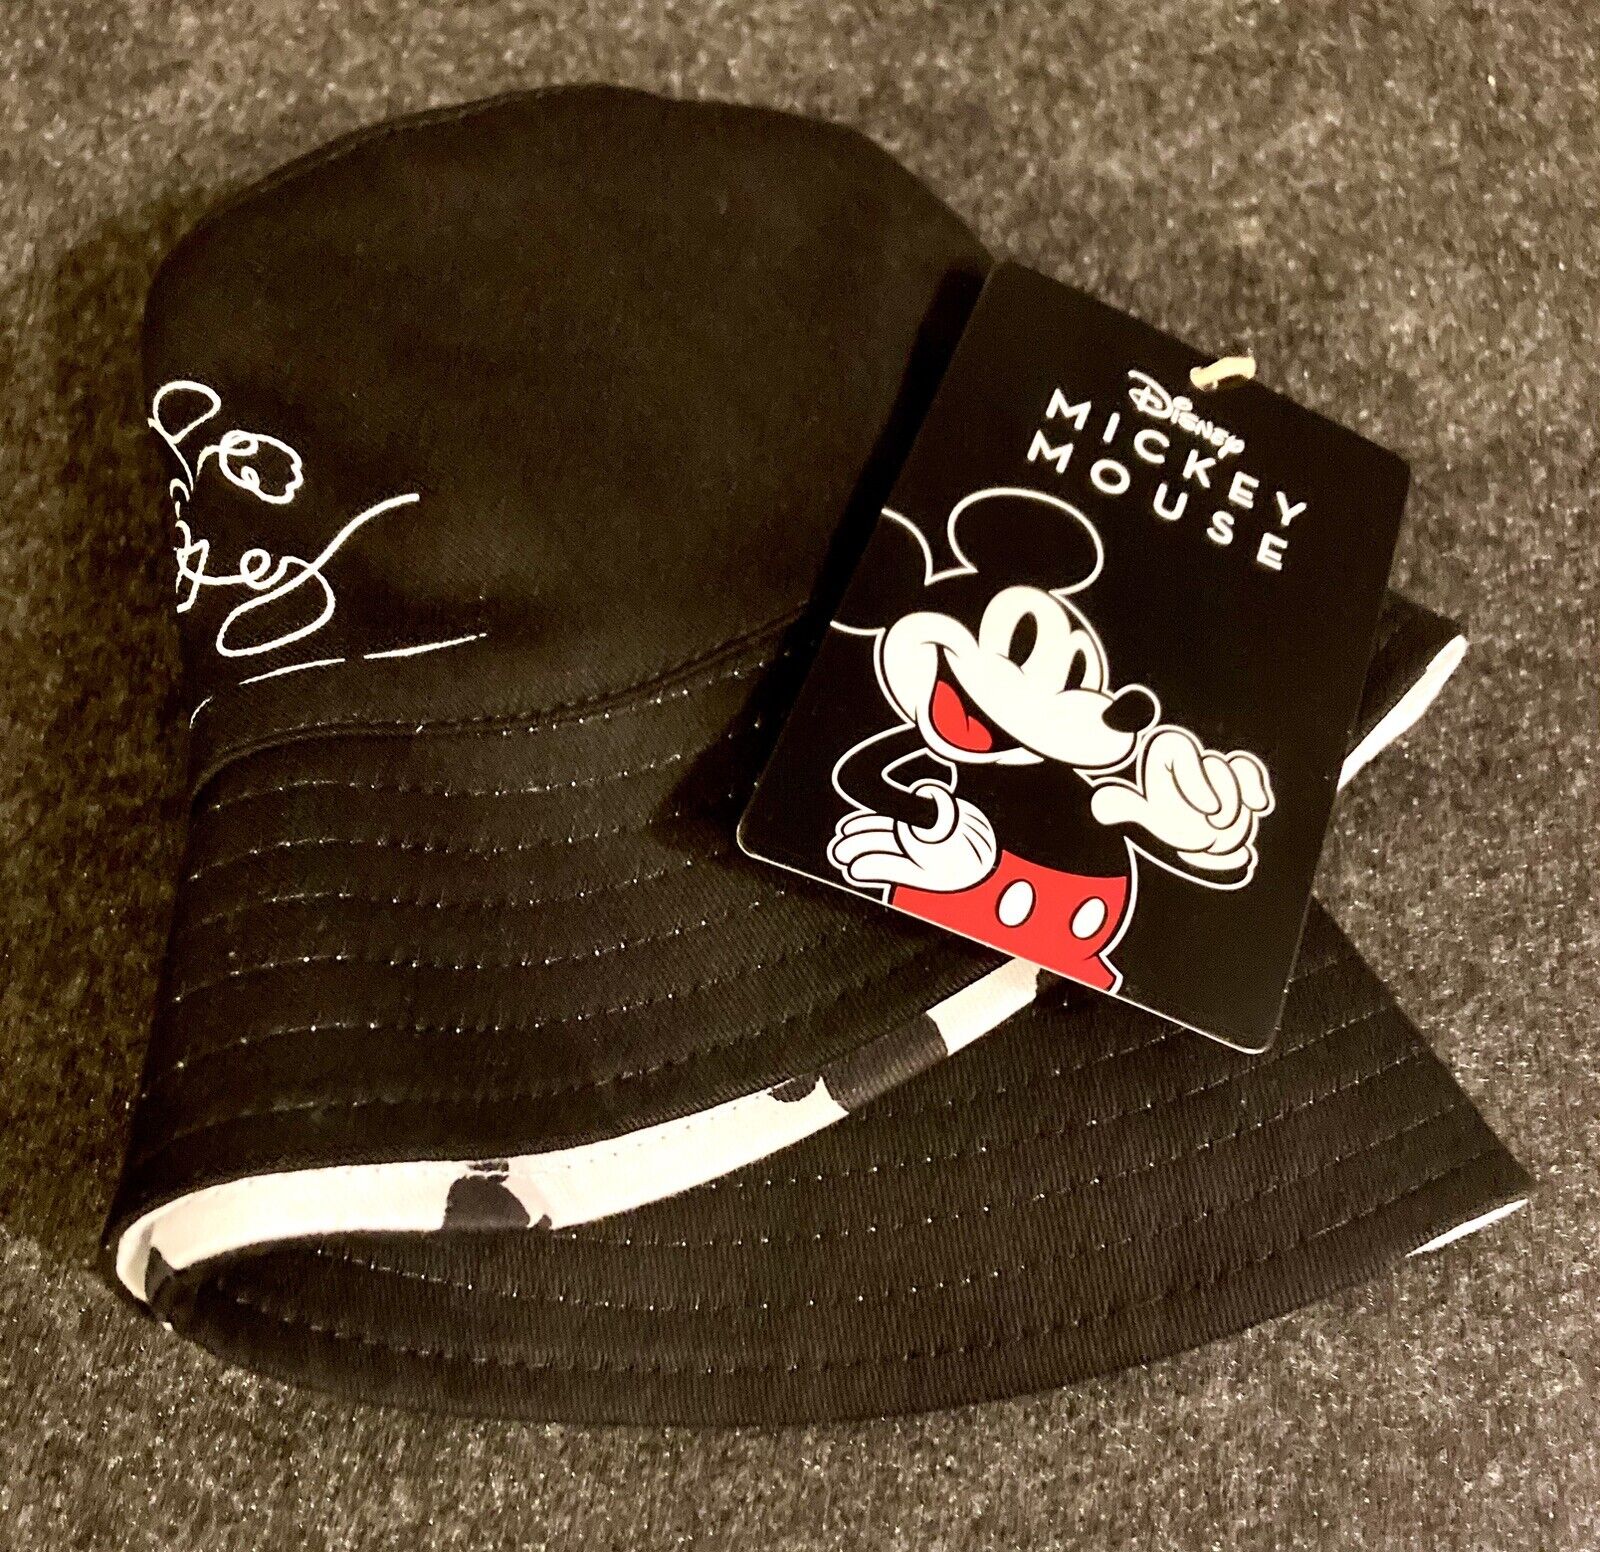 DISNEY ALDI EXCLUSIVE MICKEY MOUSE BUCKET HAT NWT BLACK REVERSIBLE FREE S&H